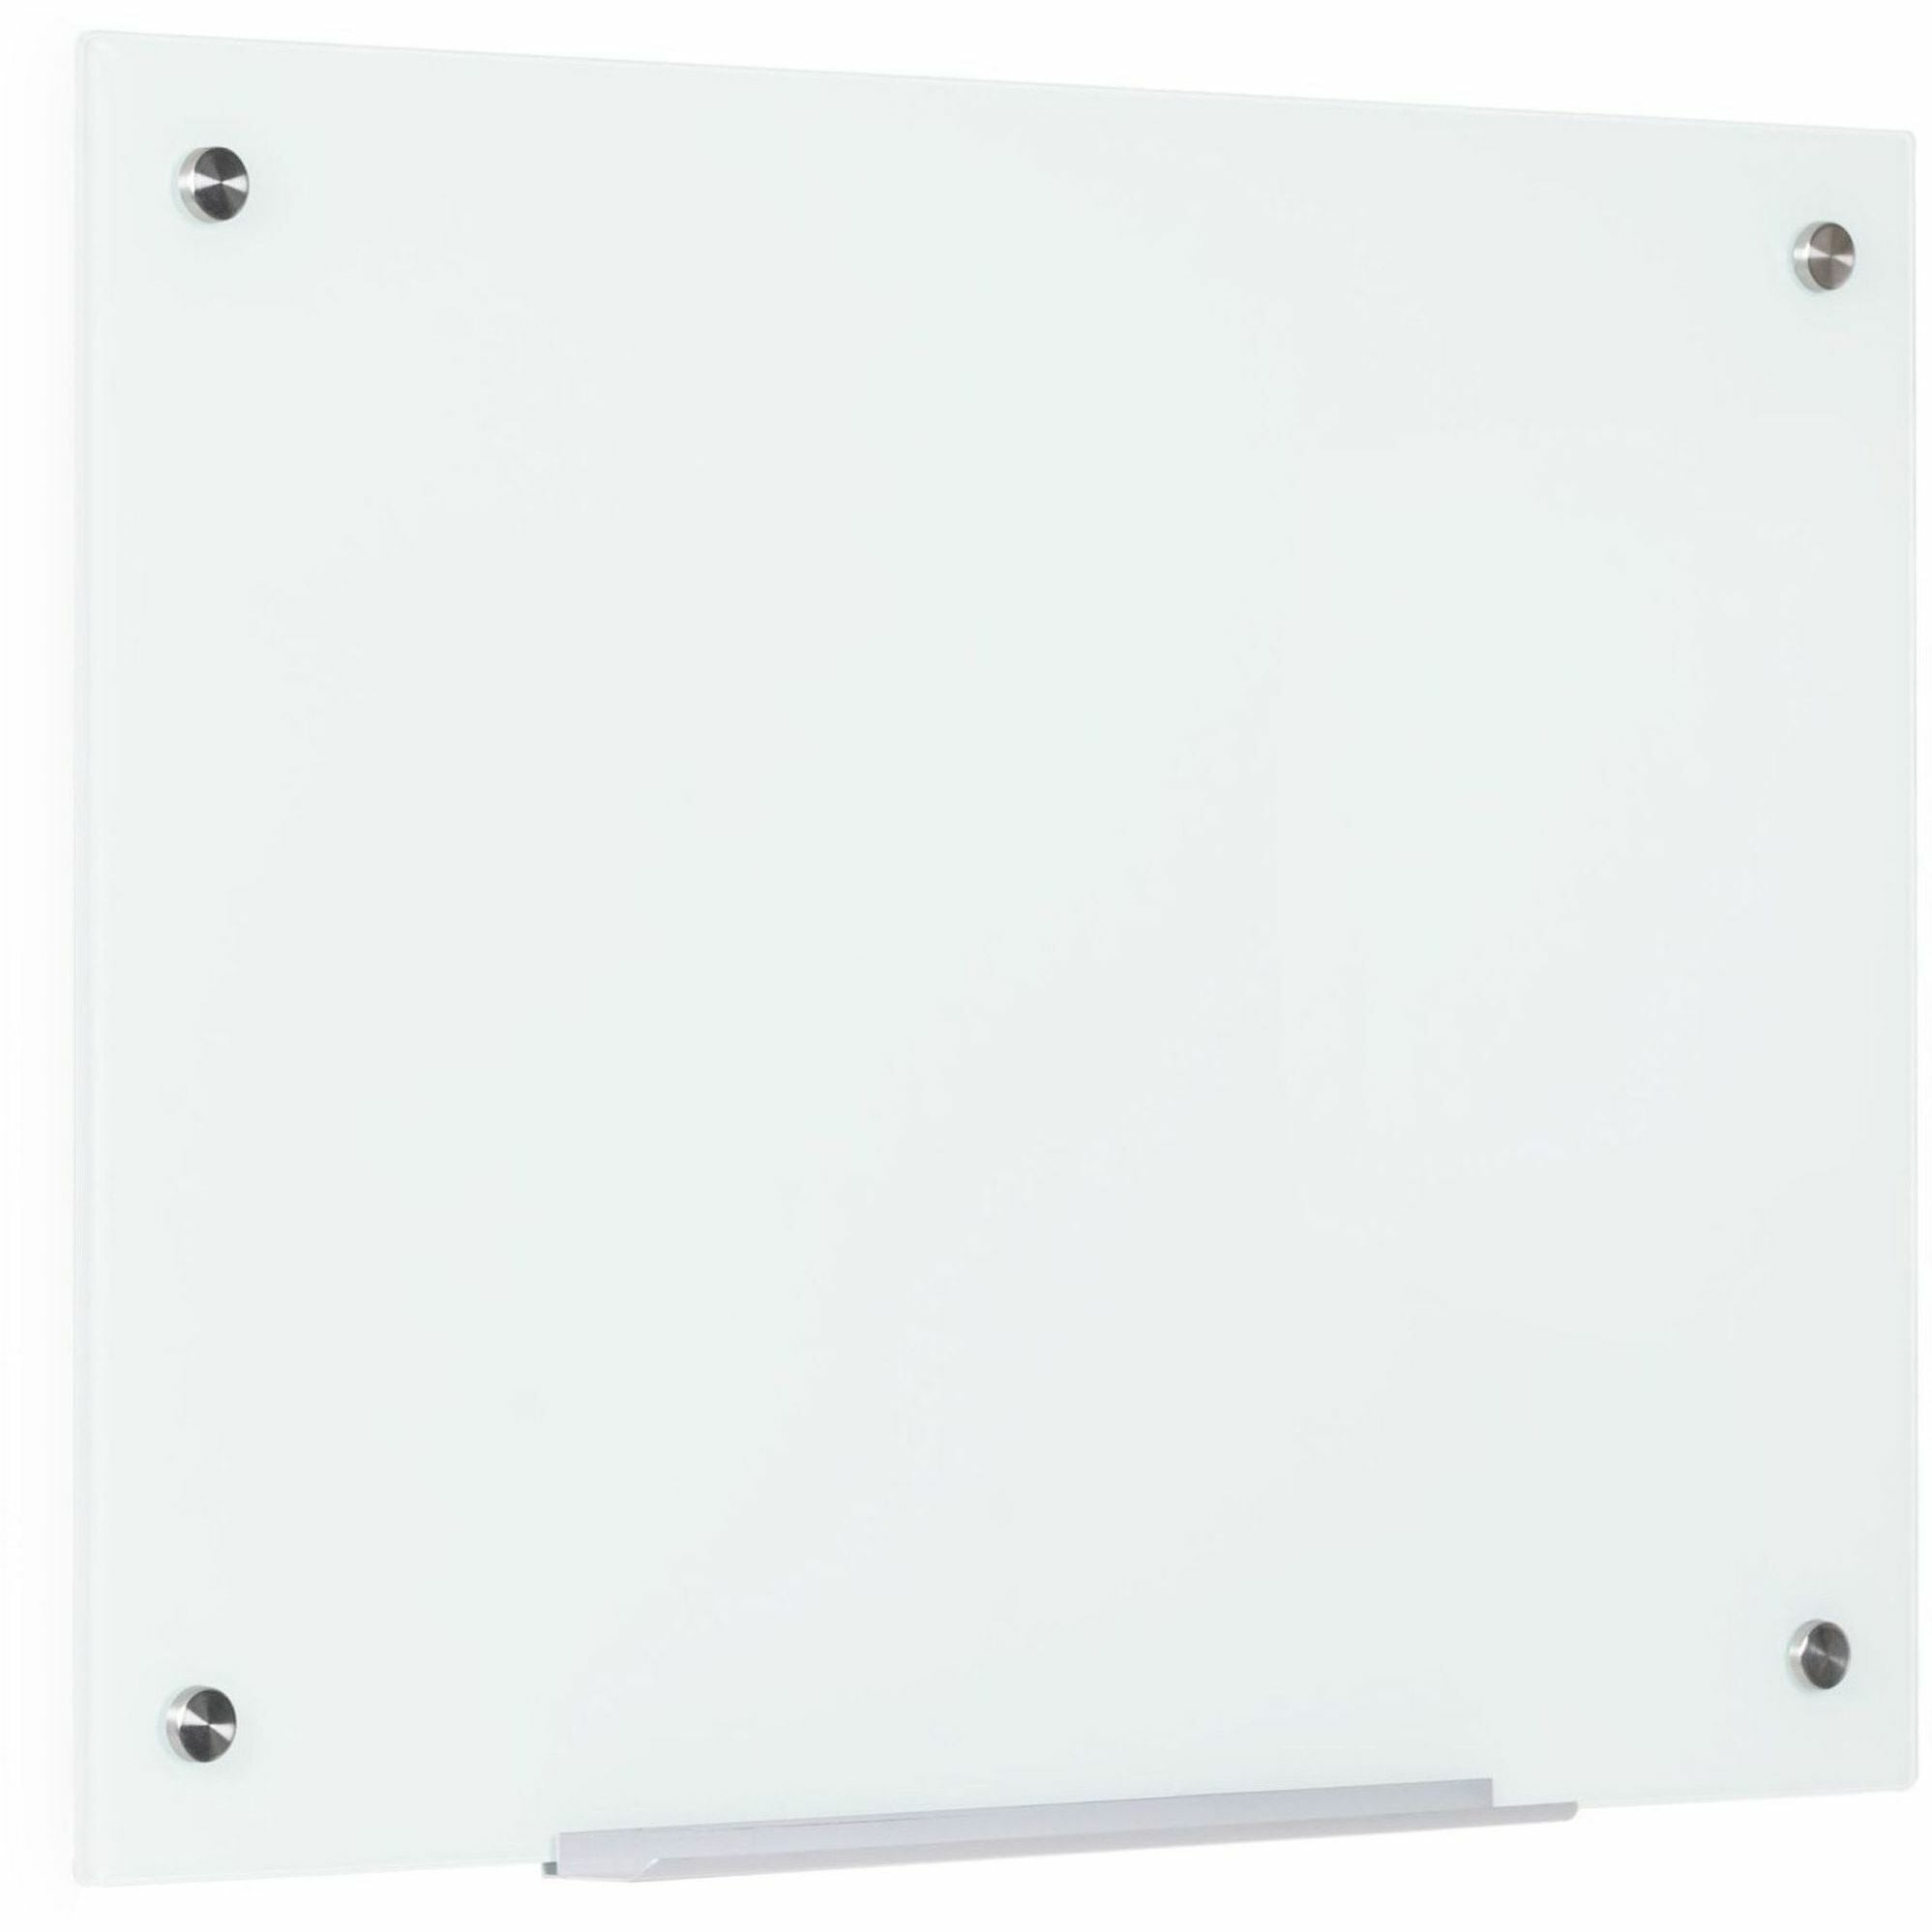 bi-silque-magnetic-glass-dry-erase-board-24-2-ft-width-x-36-3-ft-height-white-glass-surface-rectangle-horizontal-vertical-magnetic-1-each_bvcgl070107 - 4